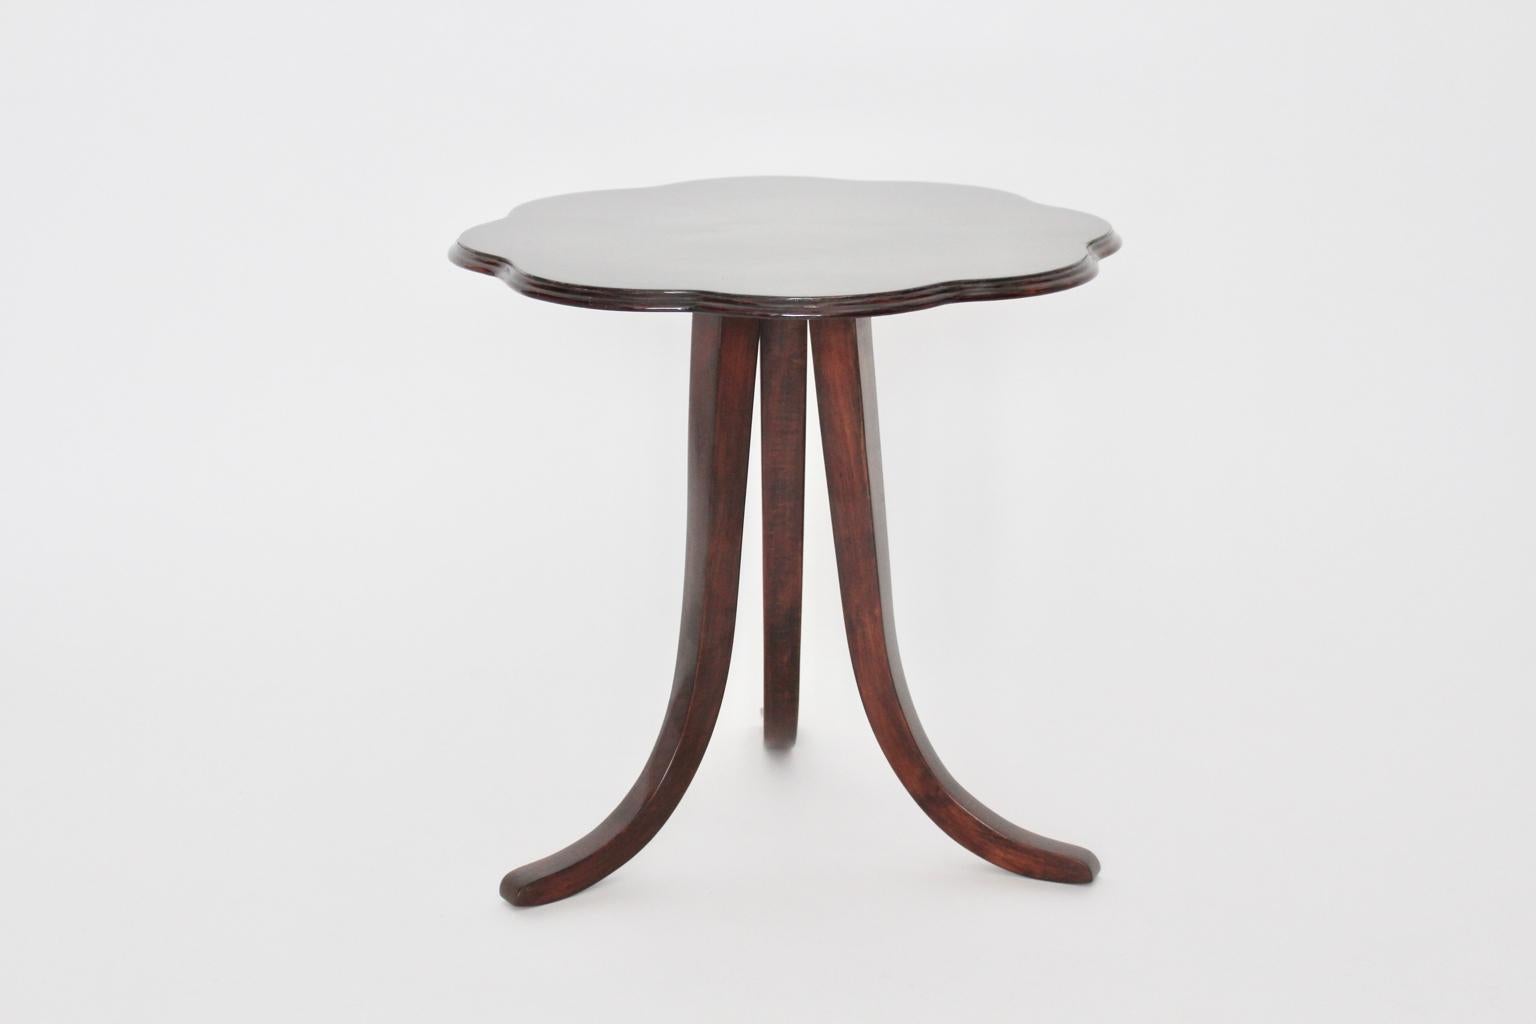 Art Deco Walnut Side Table or Coffee Table by Josef Frank for Thonet, circa 1925 For Sale 10